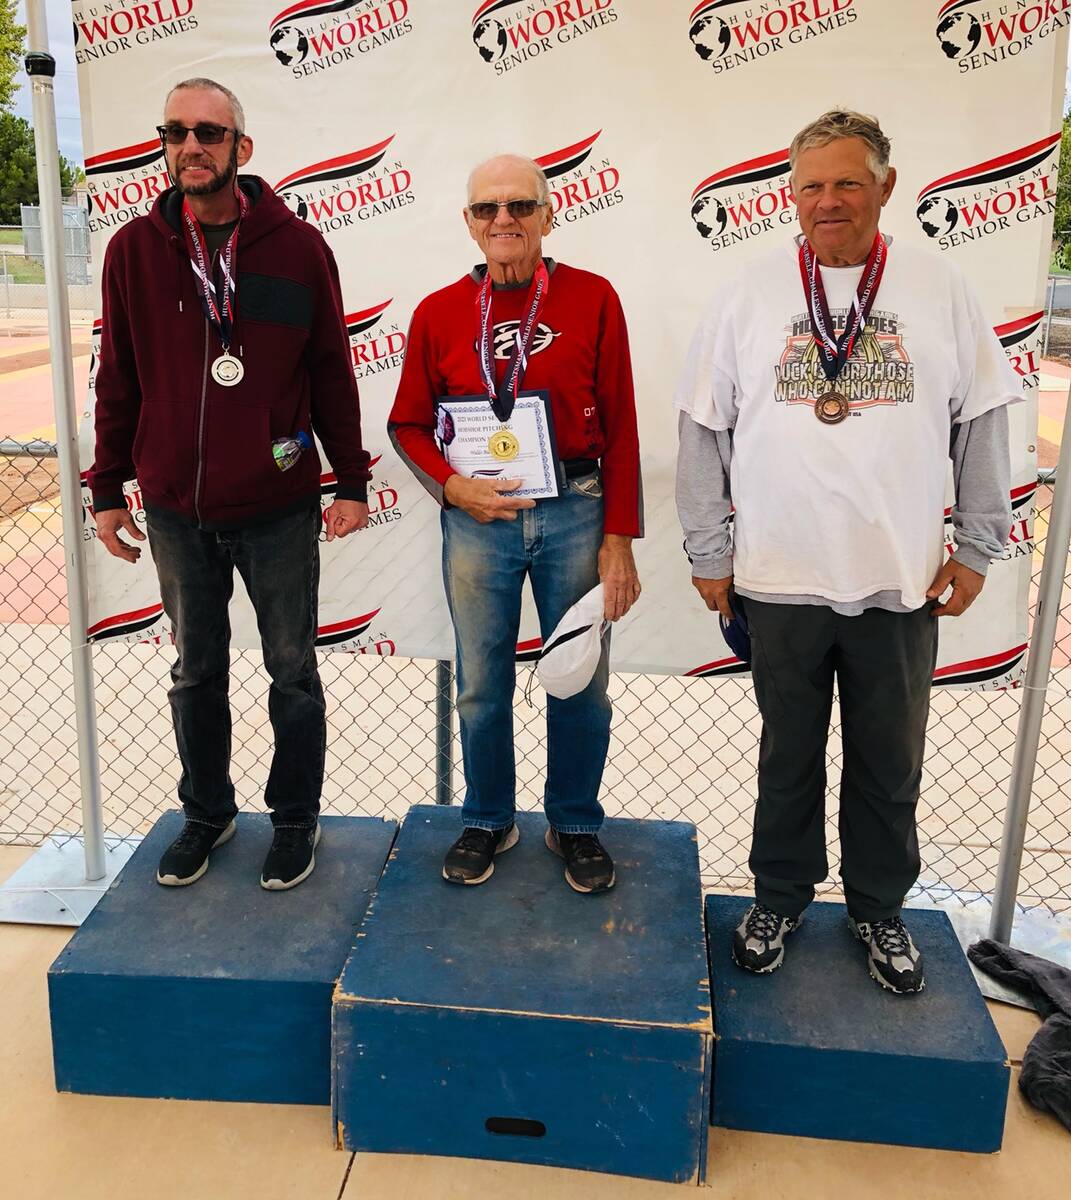 Special to the Pahrump Valley Times The Huntsman World Senior Games, a qualifying event for th ...